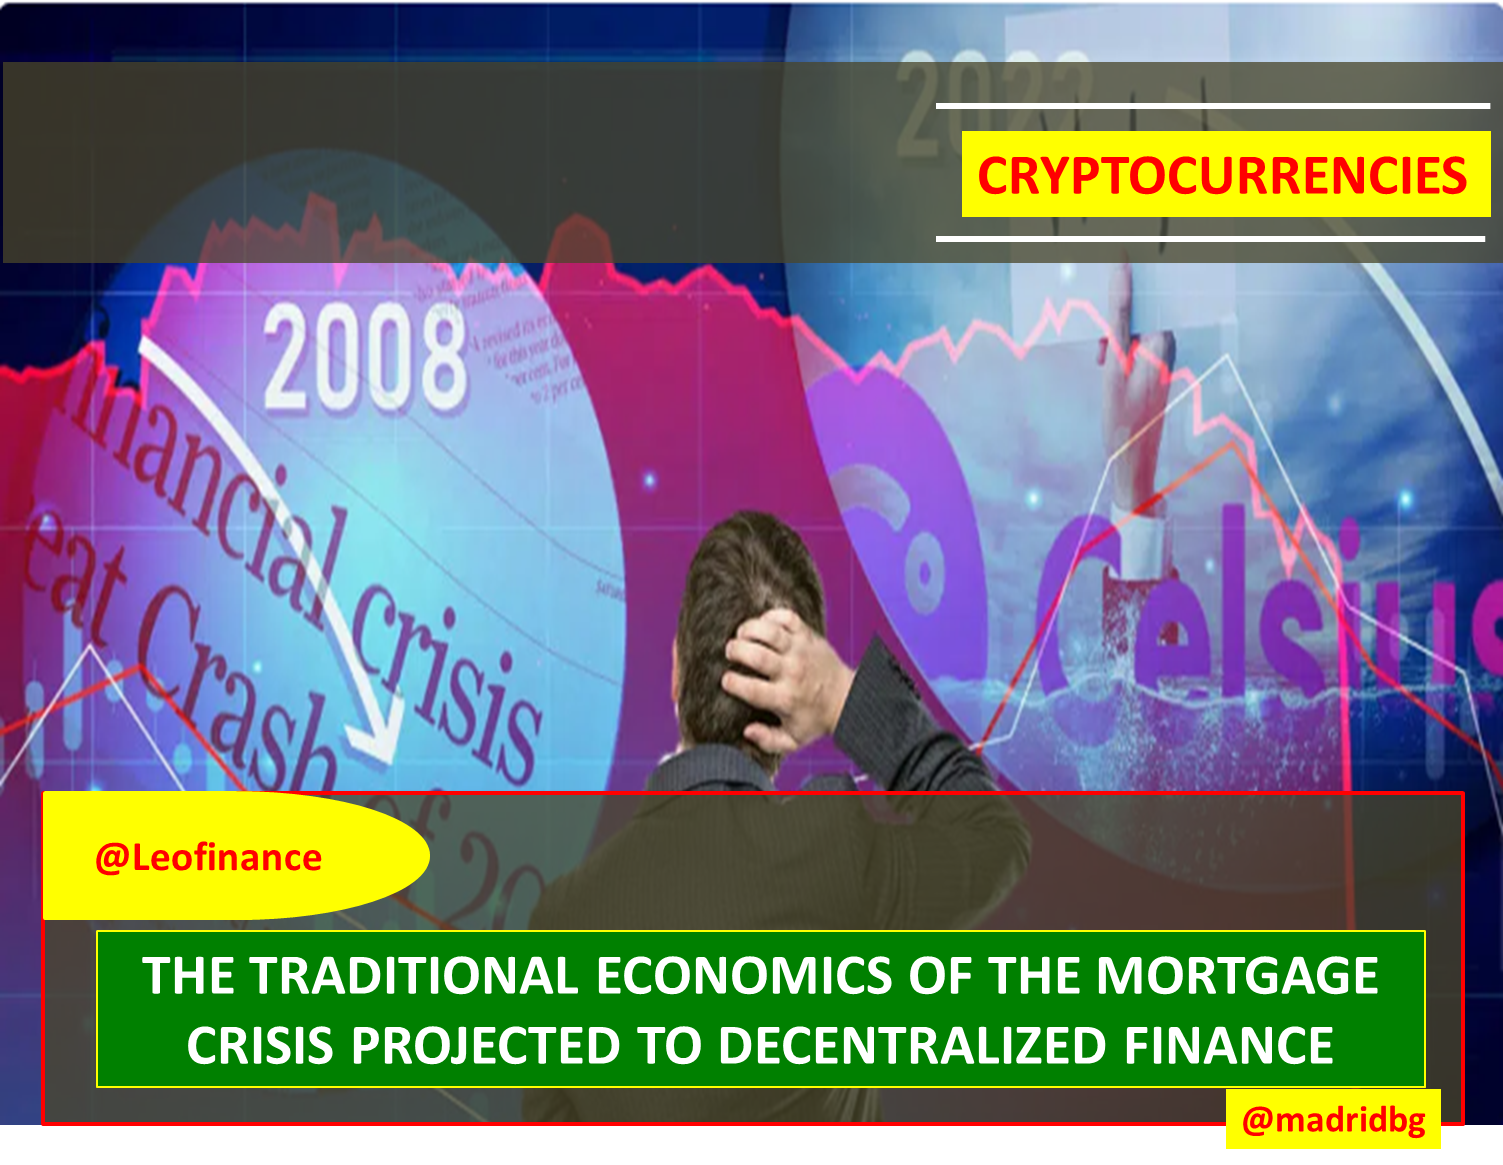 @madridbg/the-traditional-economics-of-the-mortgage-crisis-projected-to-decentralized-finance